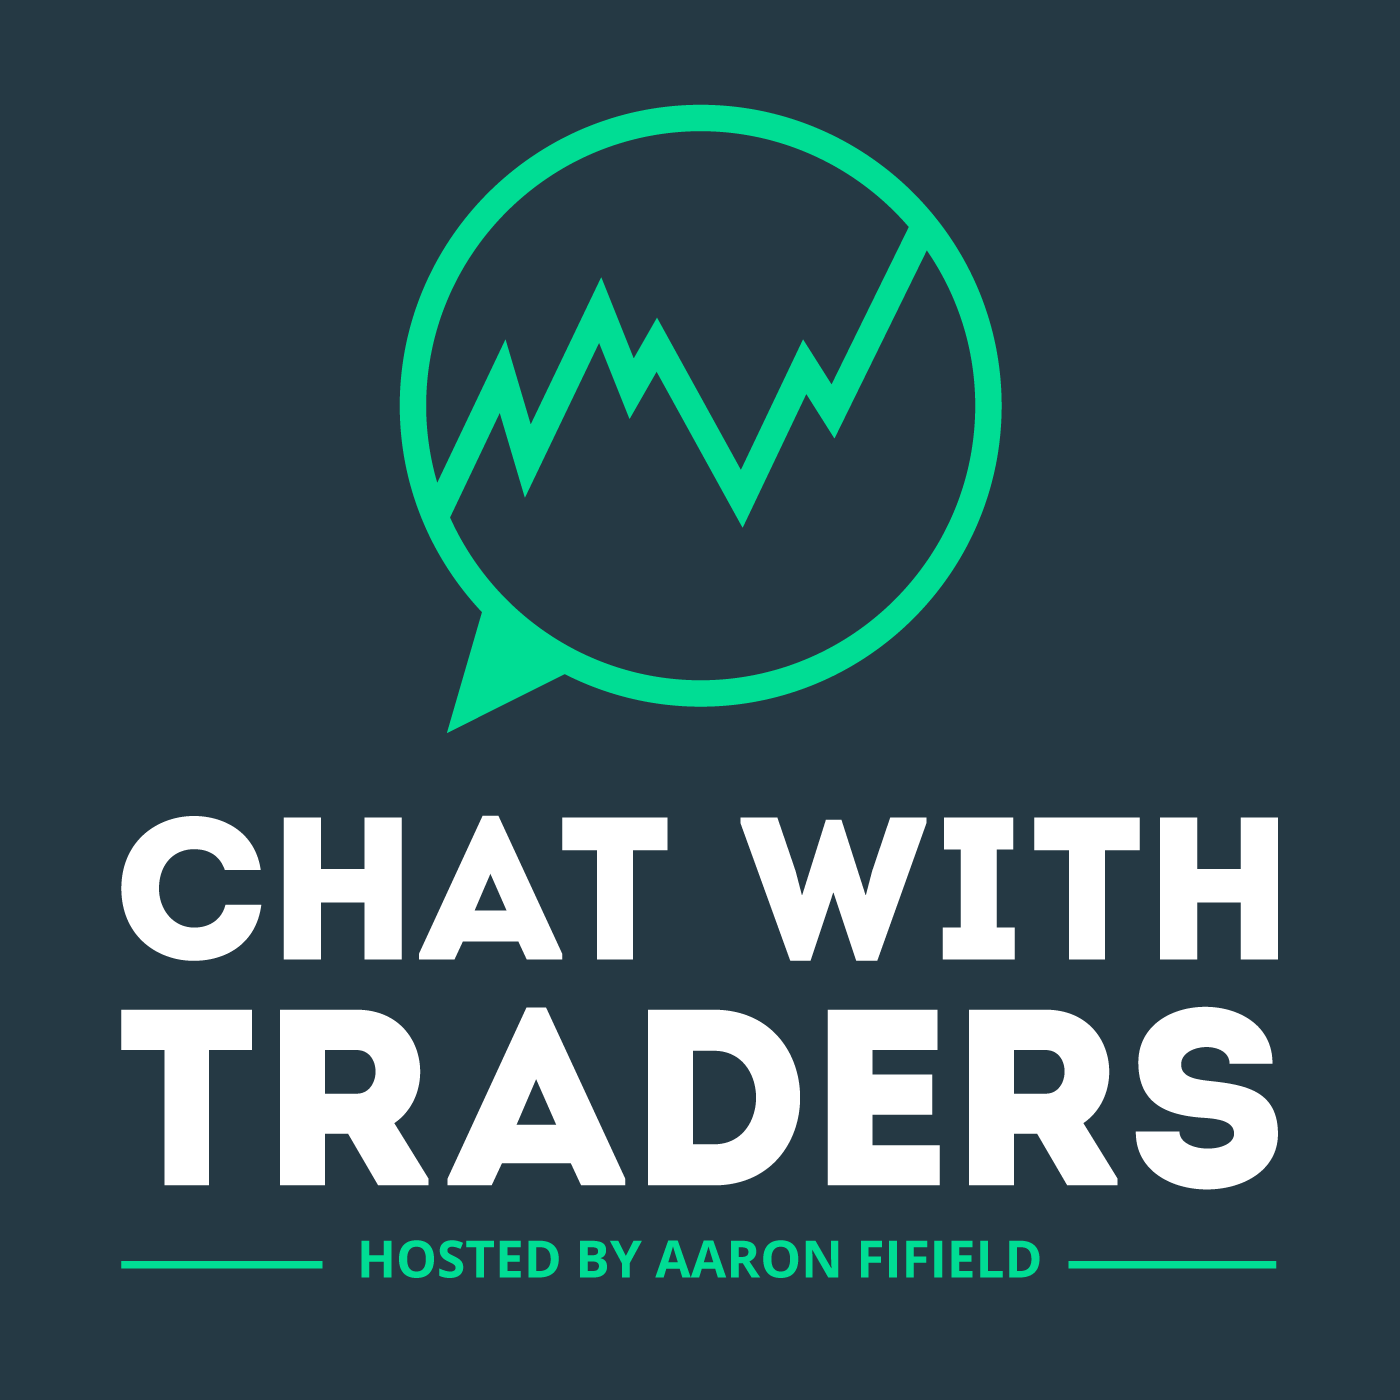 8-trading-podcasts-moi-trader-nen-nghe-TraderViet3.png